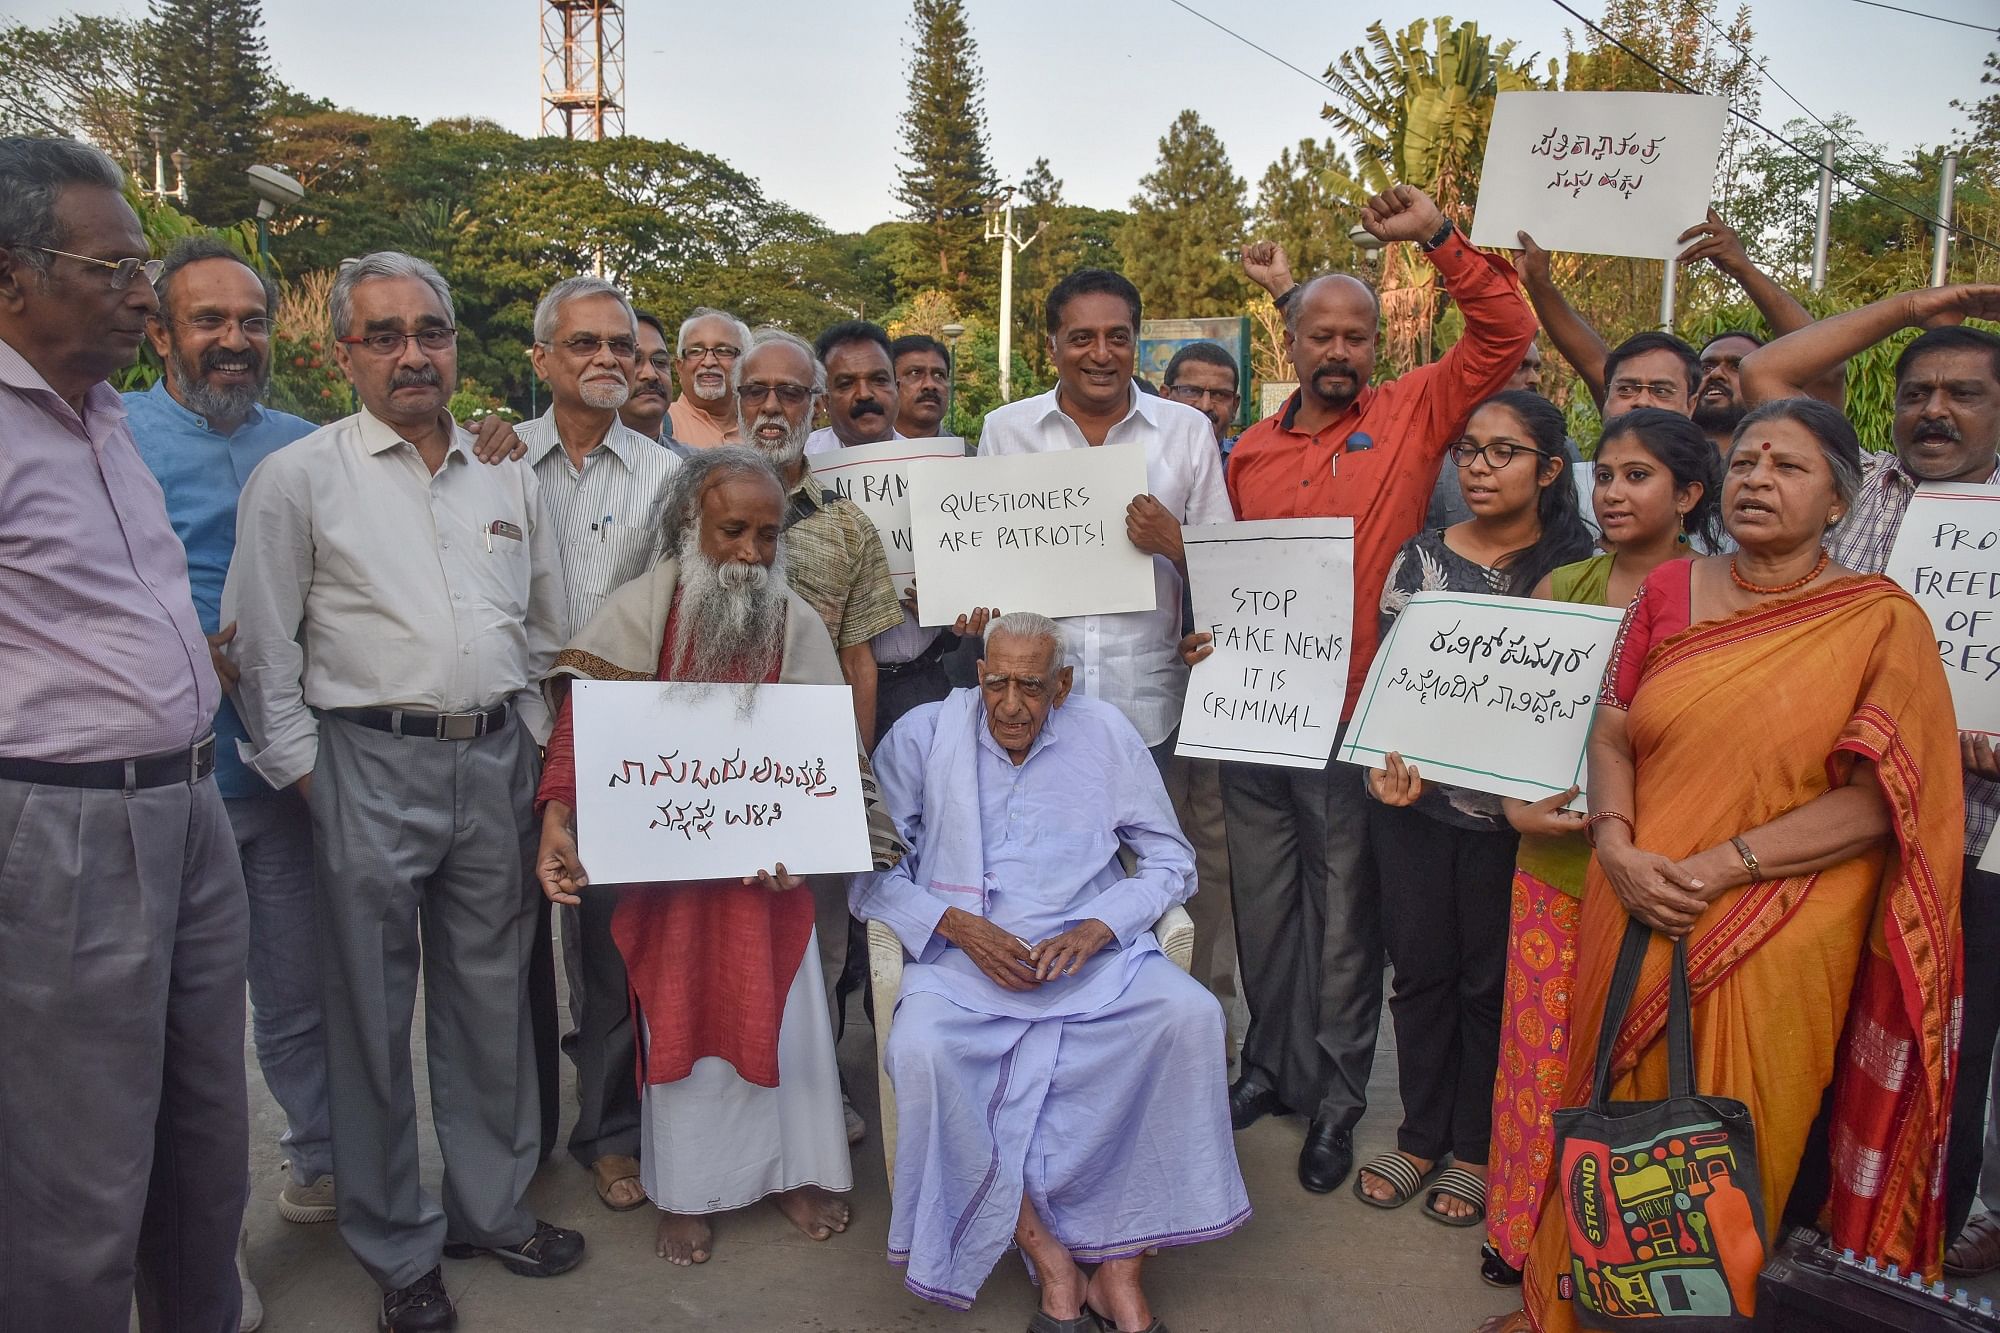 Harohalli Srinivasaiah Doreswamy (1918-2021) taught science, worked as a journalist, and went to jail during the freedom movement. He supported many causes and participated in many demonstrations, including this one in 2019 to oppose curbs on freedom of e